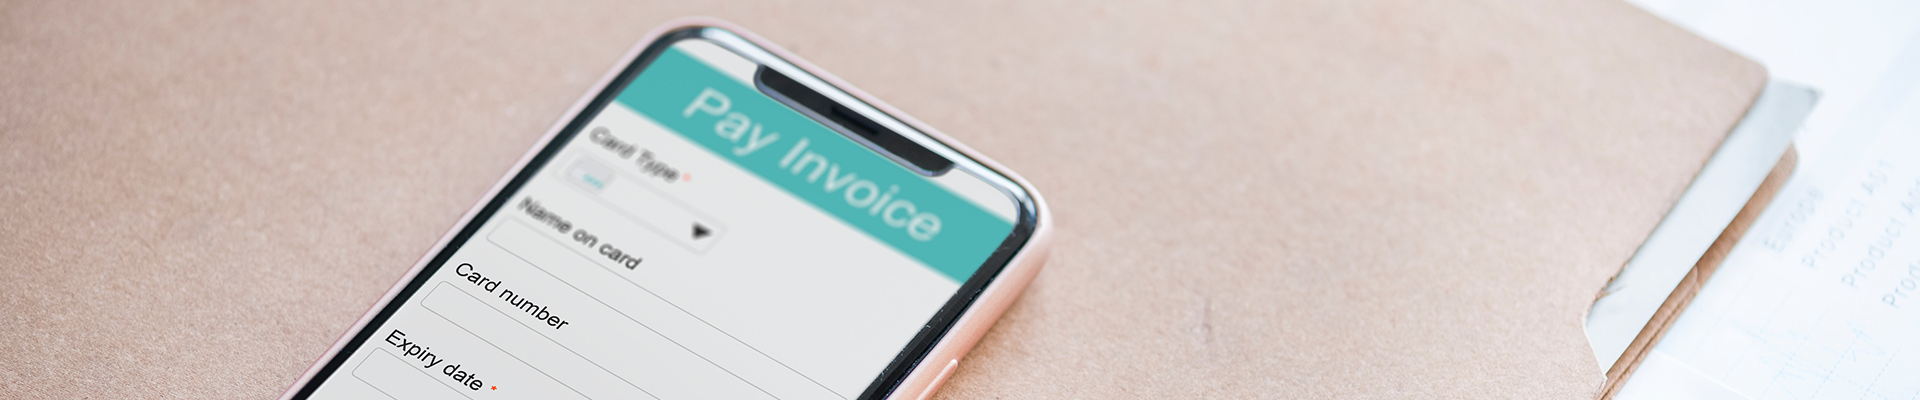 Pay Invoice Software displayed on a phone screen